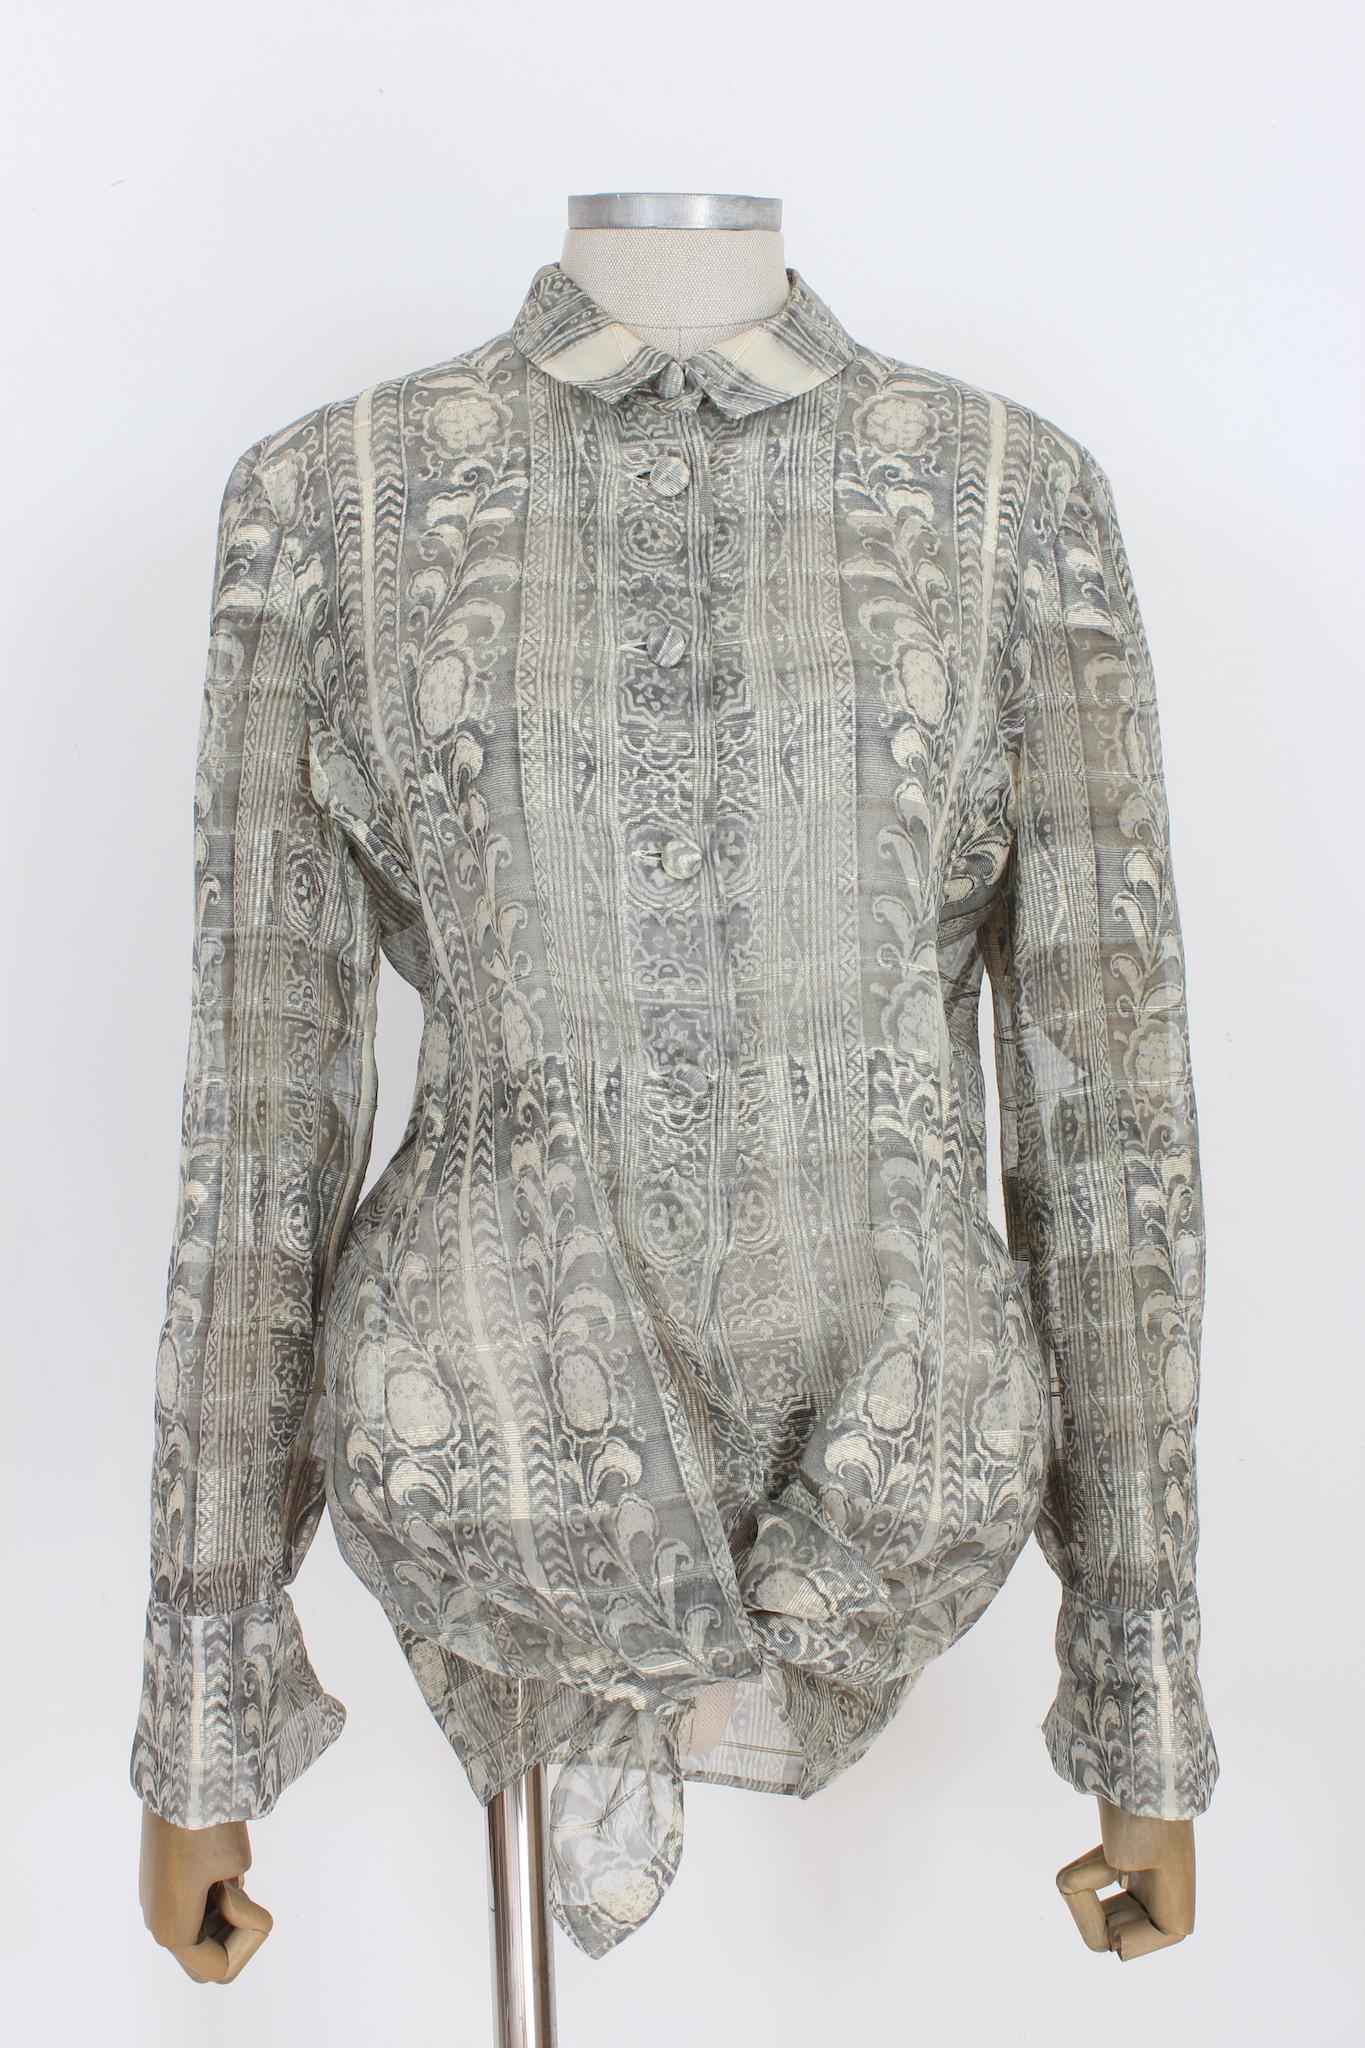 Giorgio Armani classic vintage 90s shirt. Gray and beige color with floral designs, 100% transparent silk fabric. Covered buttons, peculiarity in the sleeves, possibility of closure with cufflinks. Made in Italy.

Size: 46 It 12 Us 14 Uk

Shoulder: